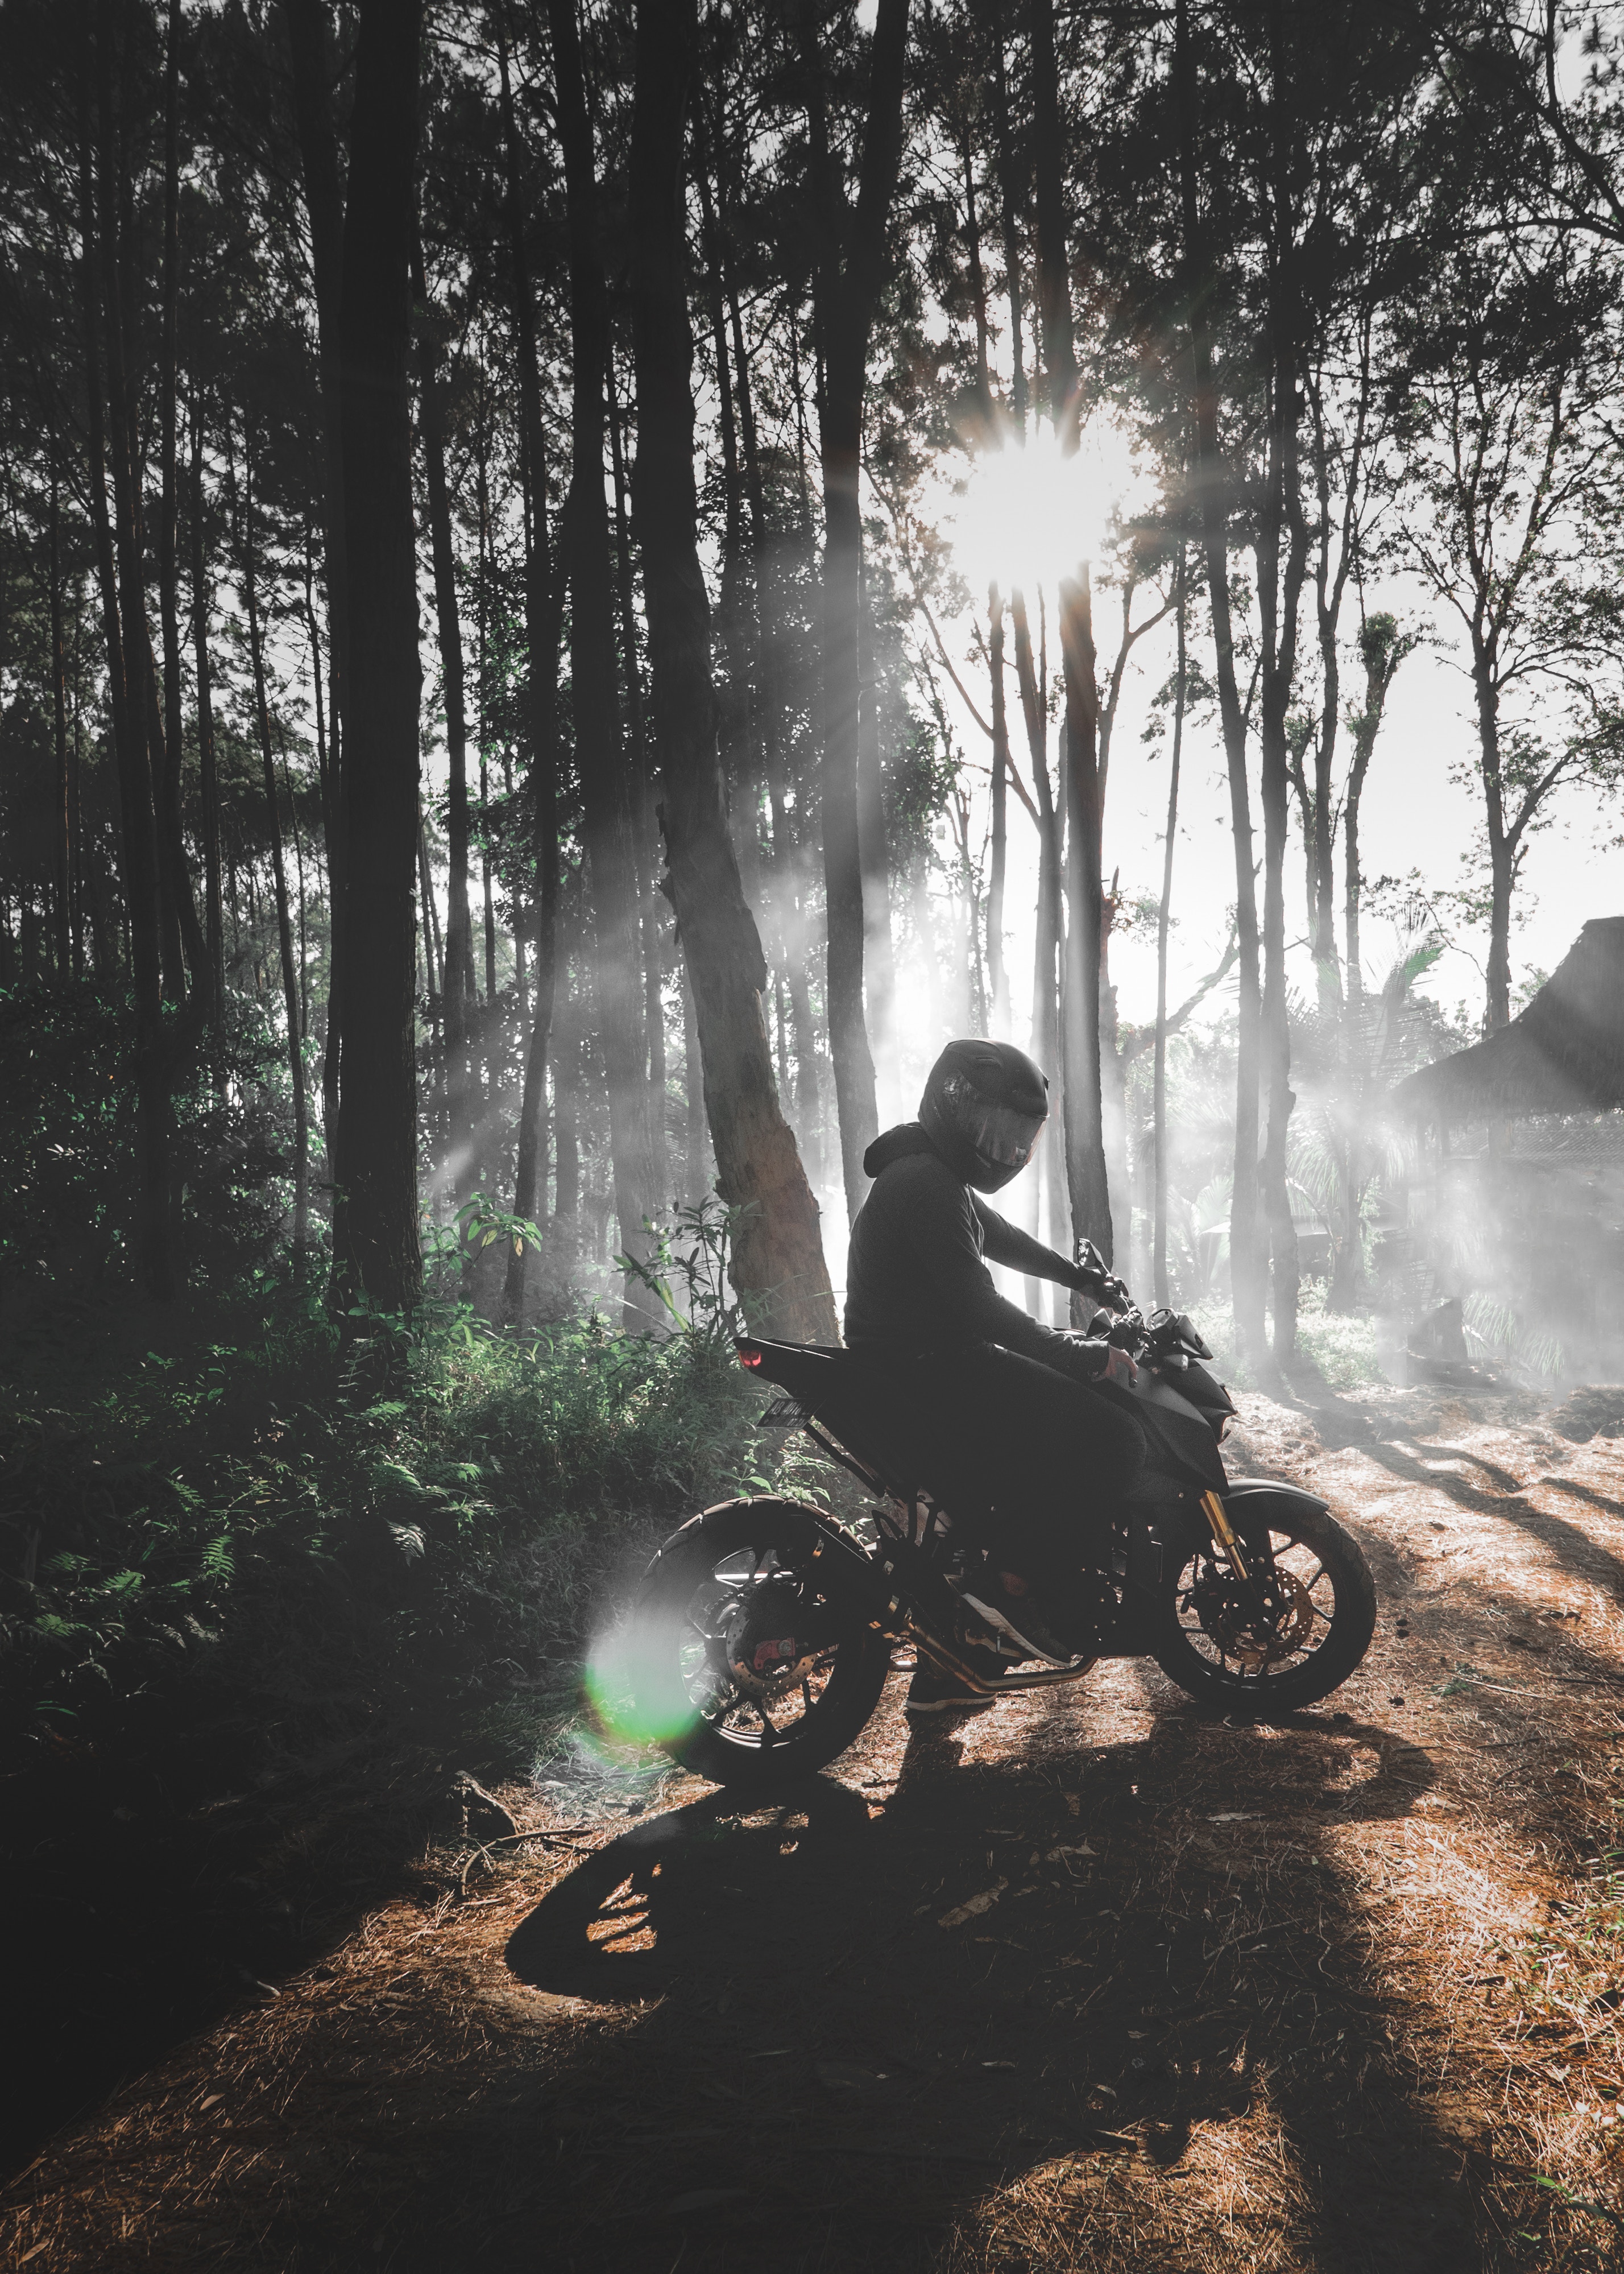 107447 Screensavers and Wallpapers Motorcyclist for phone. Download motorcyclist, motorcycles, forest, fog, motorcycle, bike pictures for free